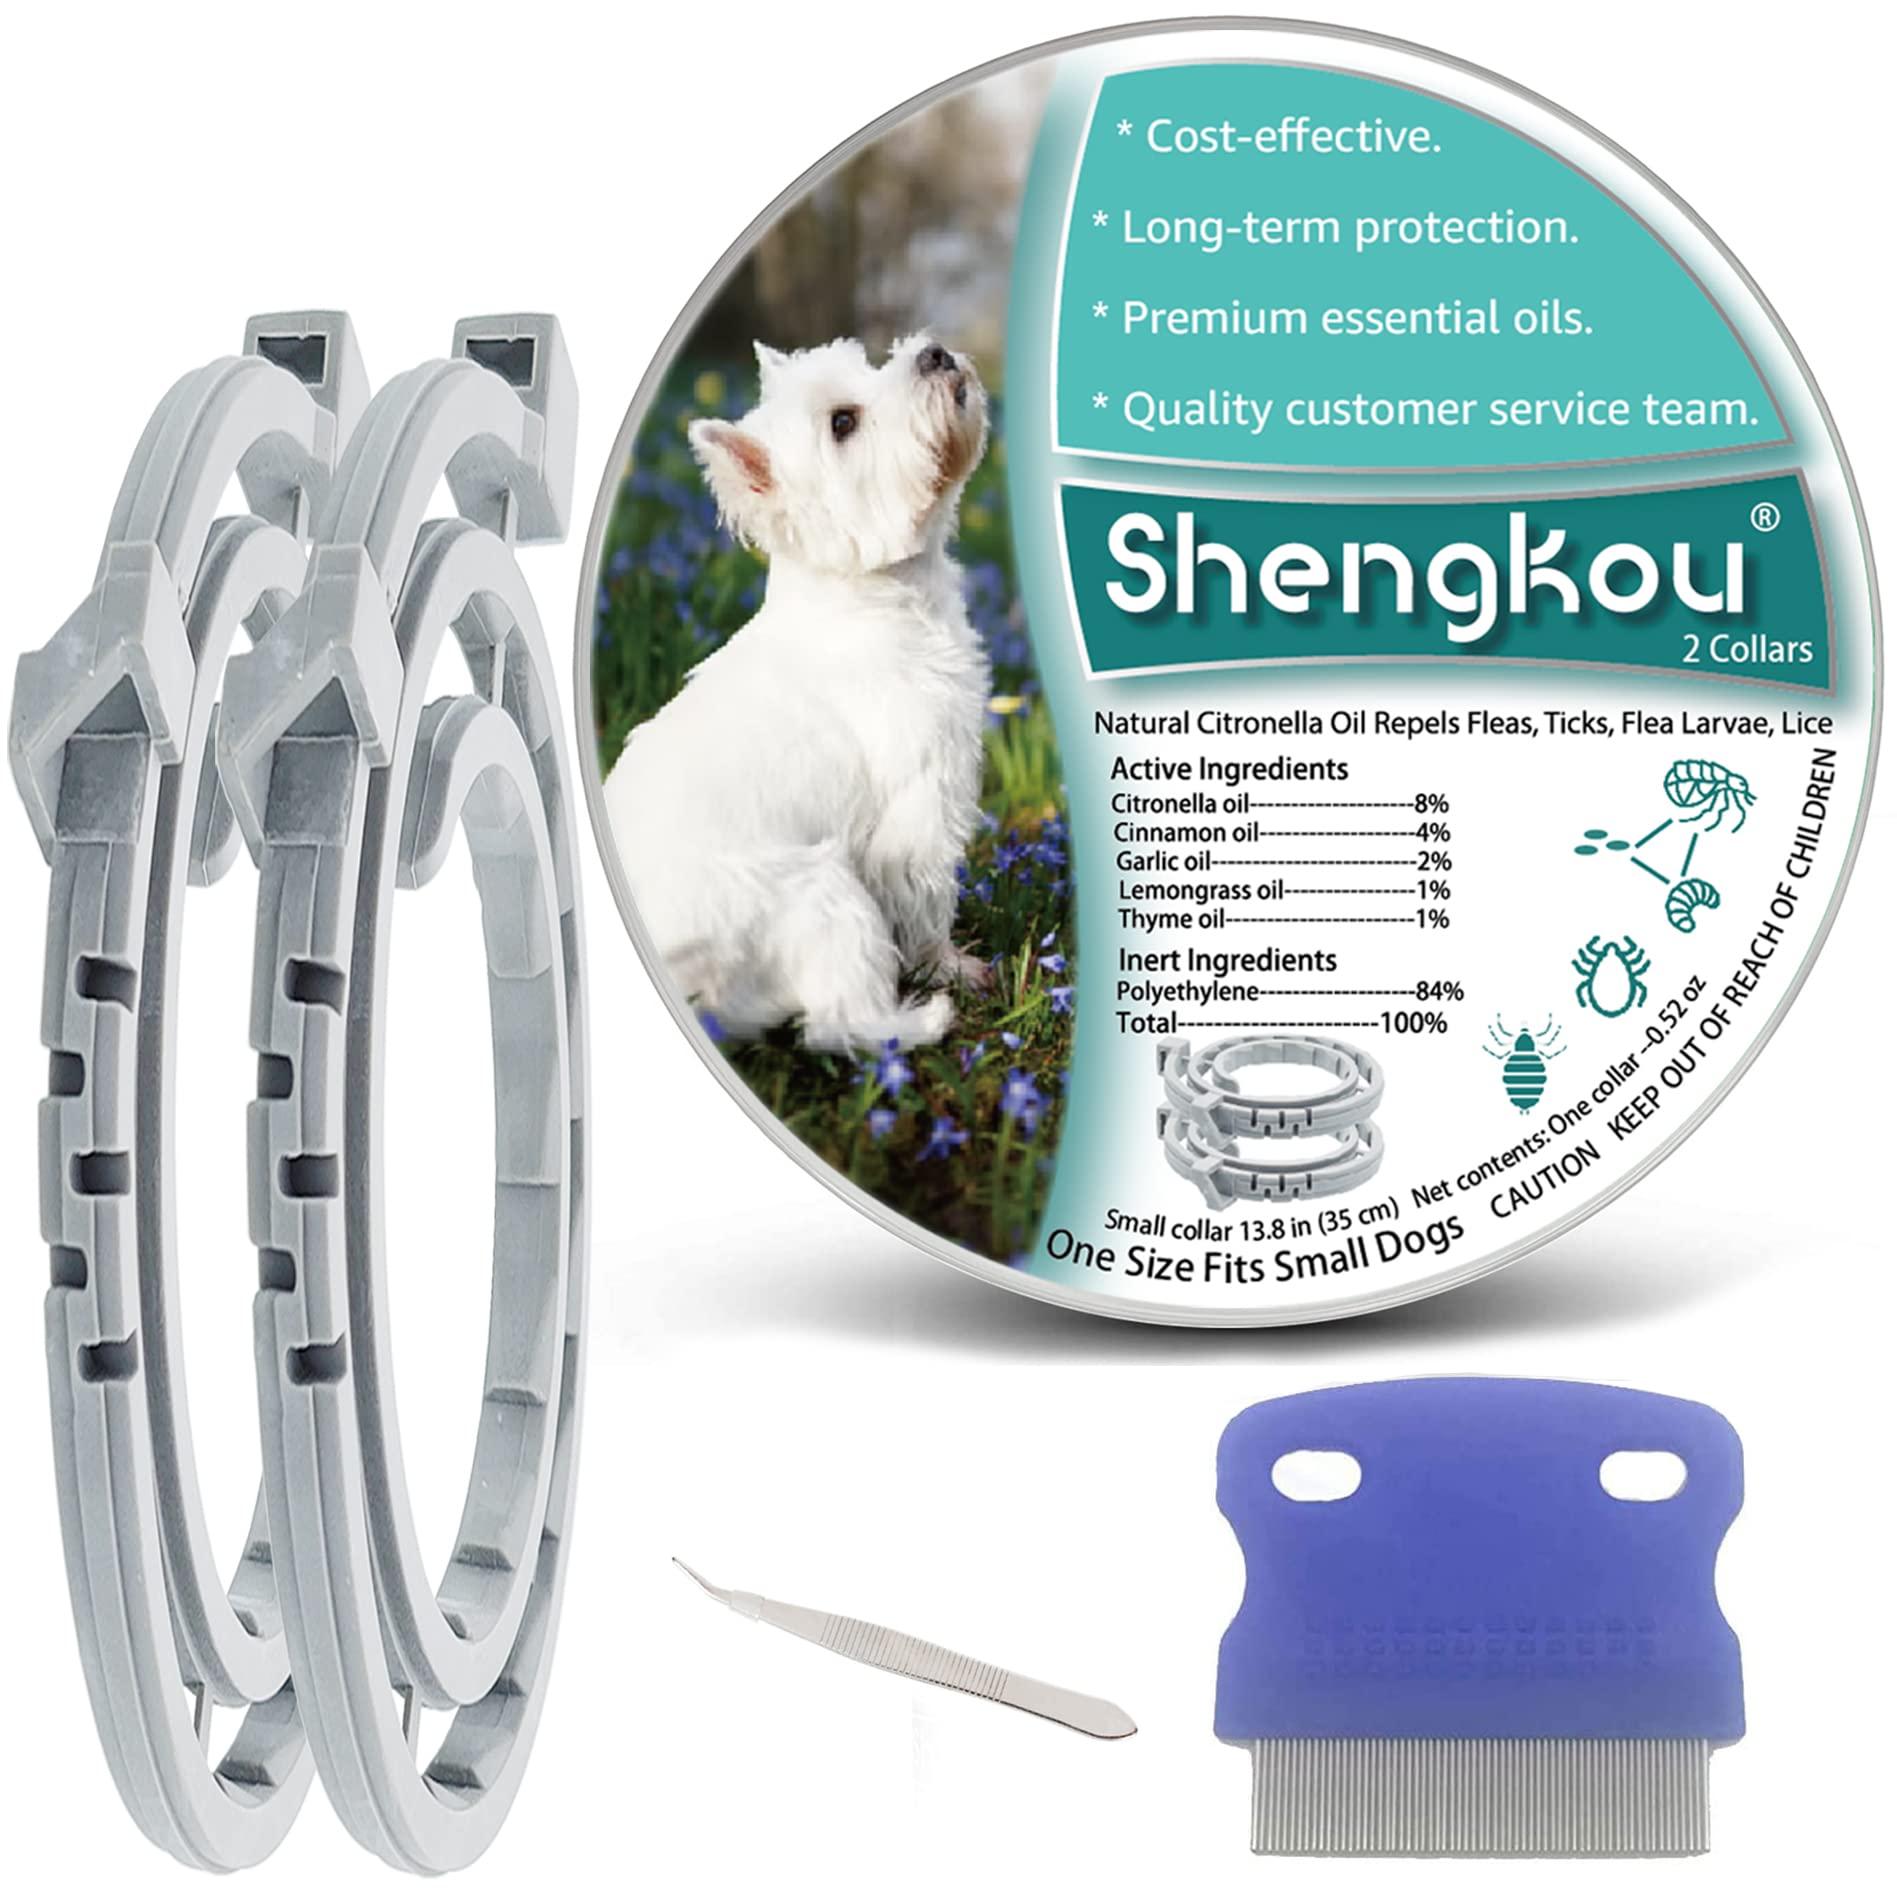 Natural Flea and Tick collar for Small Dogs - Safe Prevention and control of Pests on Puppies - Waterproof and Long-Lasting - Includes Free comb and Tick Tweezer - 2-Pack, 138 Inches